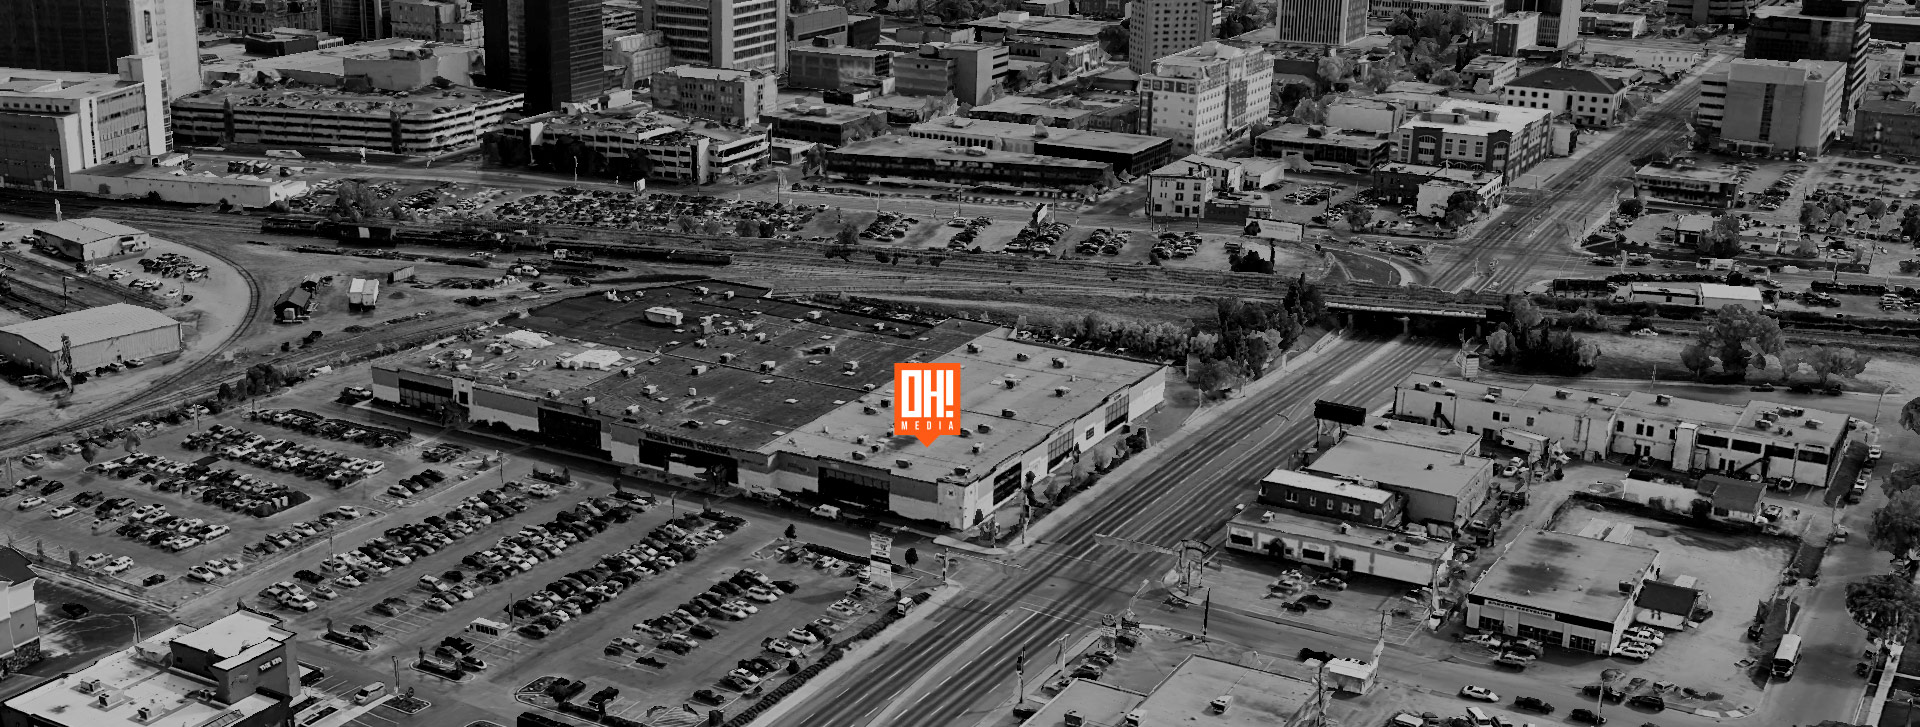 An overhead view of Regina Center Crossing with the OH! Media logo map marker